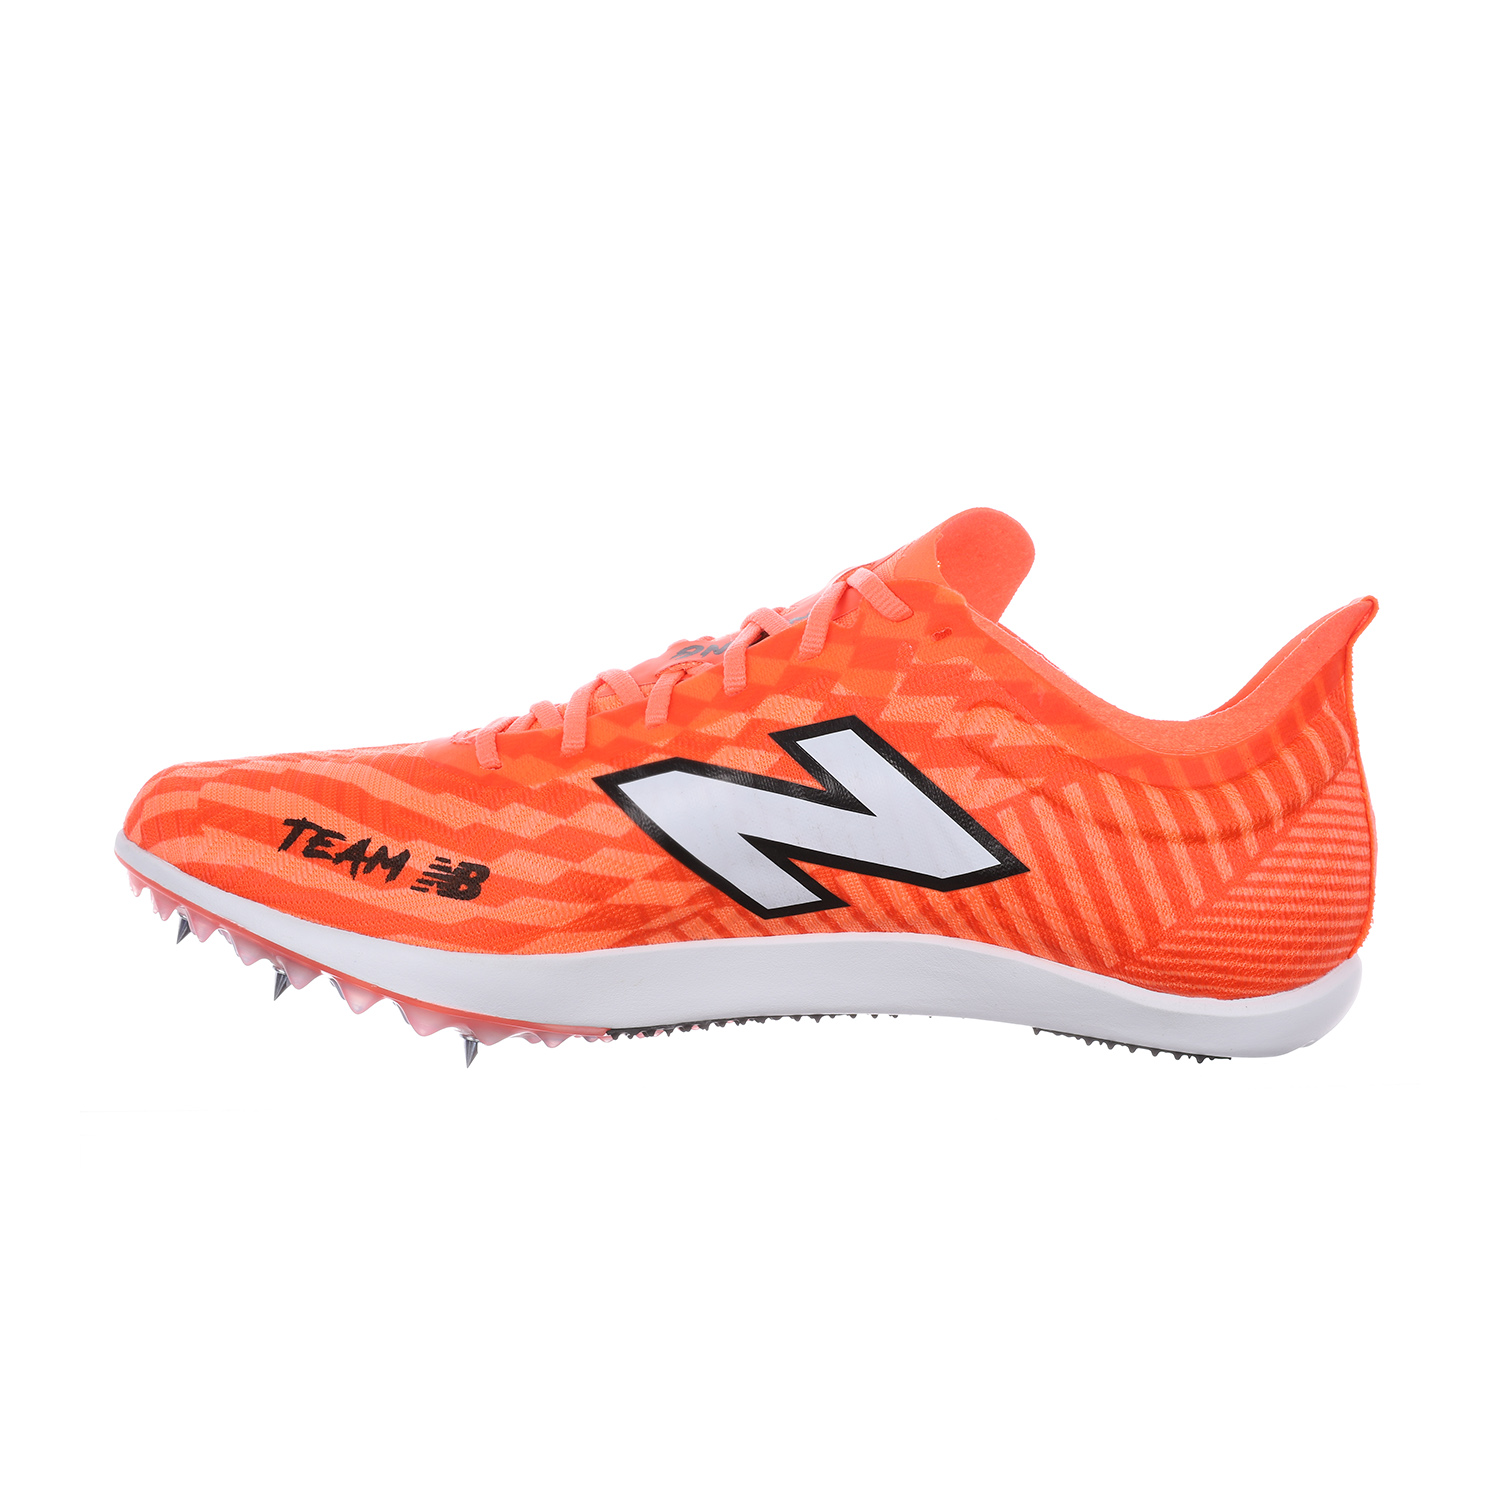 New Balance Fuelcell Md500 V9 - Dragon Fly